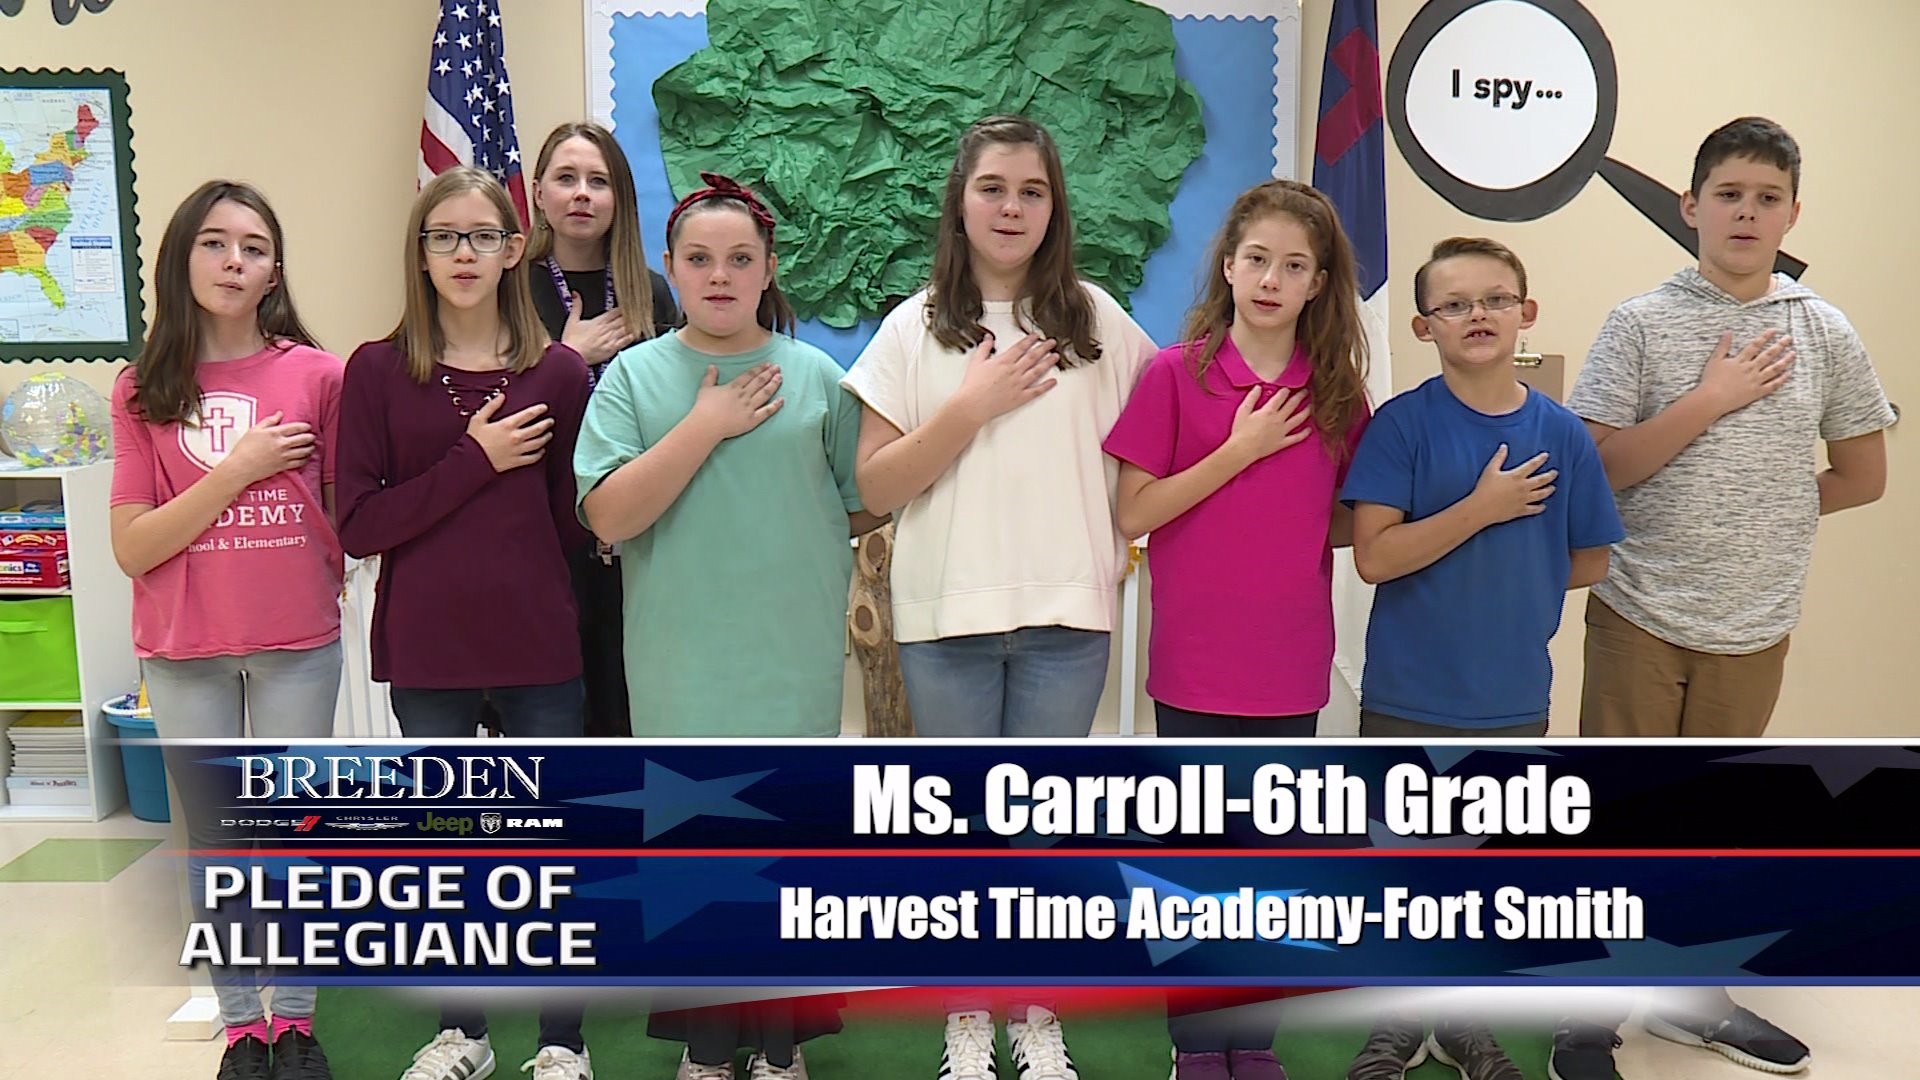 Ms. Carroll  6th Grade Harvest Time Academy, Fort Smith